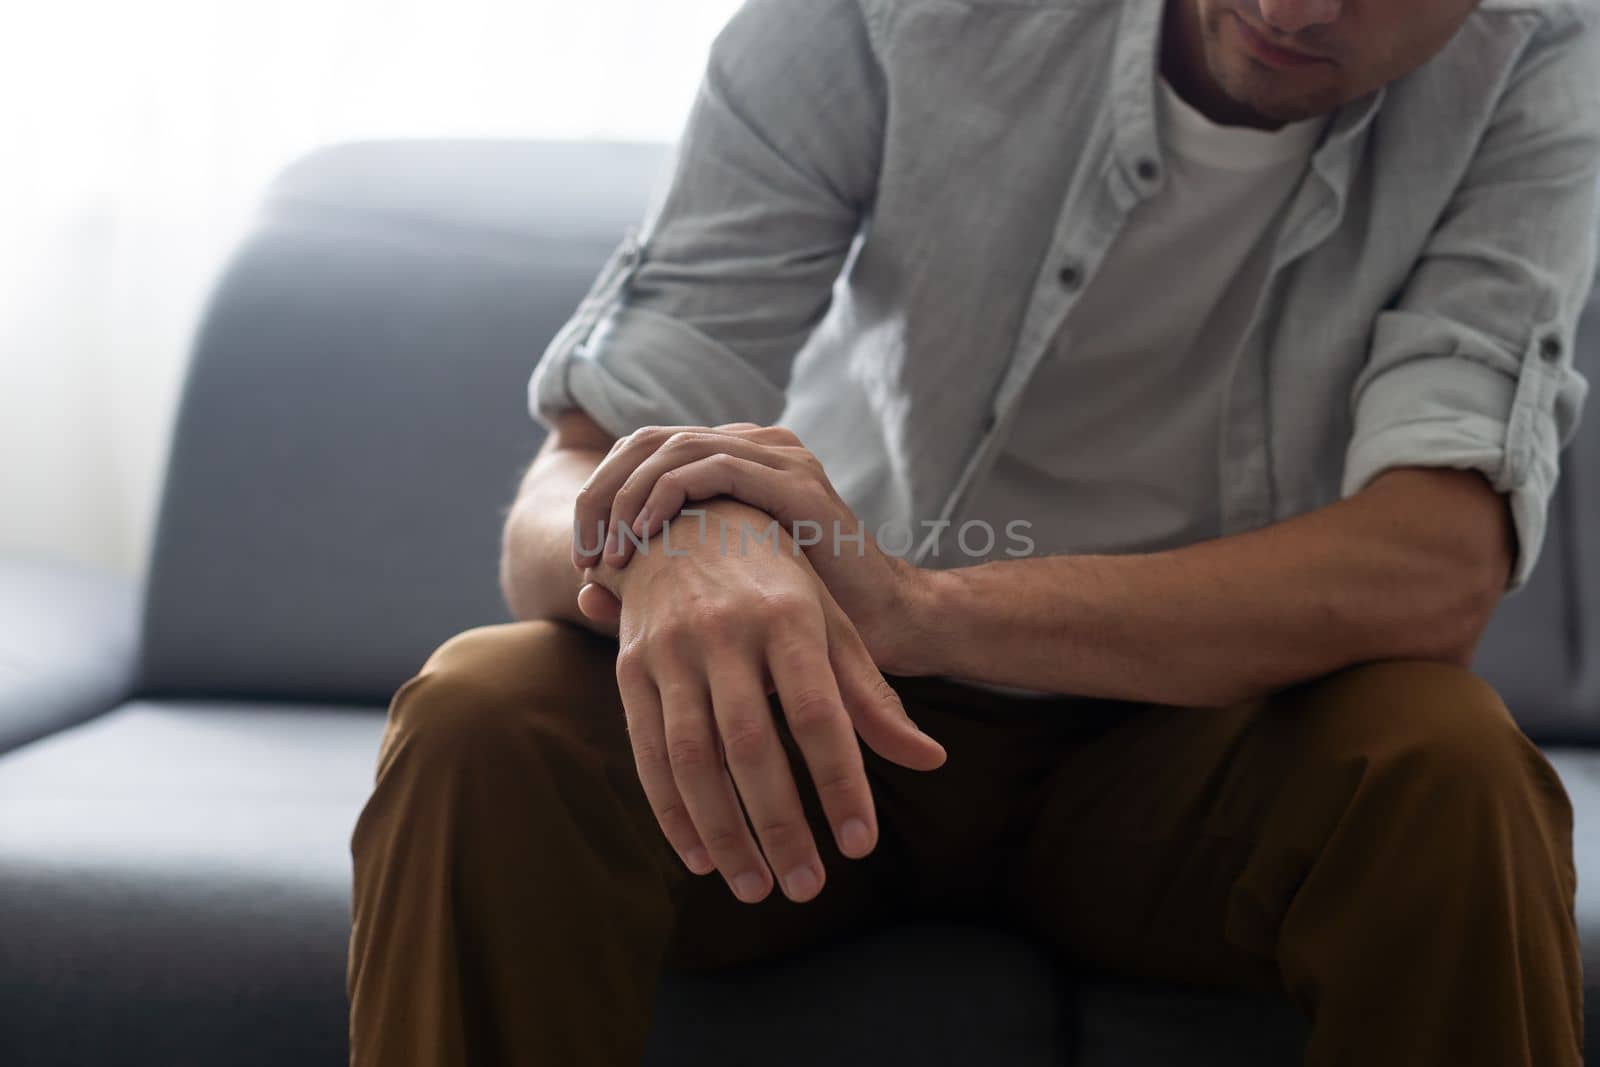 Man's arm touches a painful wrist caused by work.